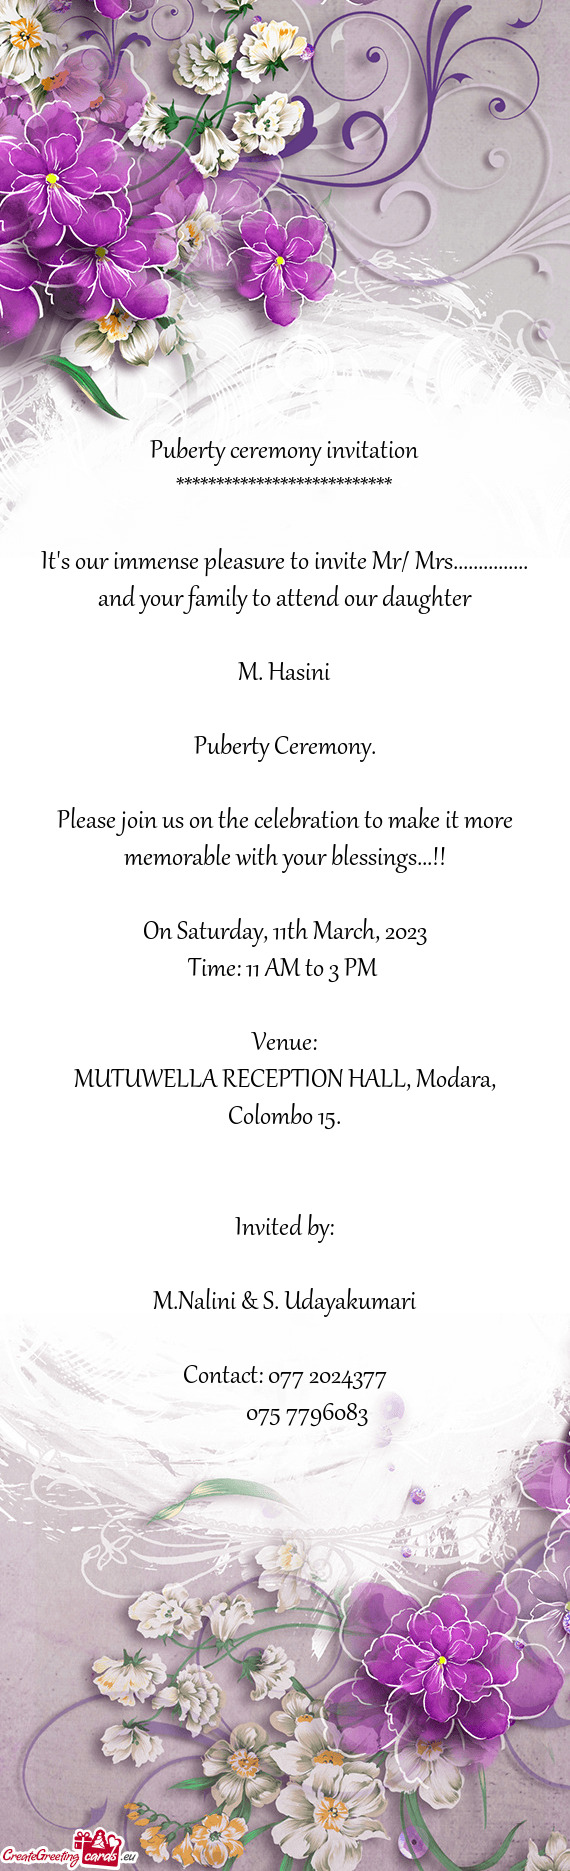 It's our immense pleasure to invite Mr/ Mrs............... and your family to attend our daughter